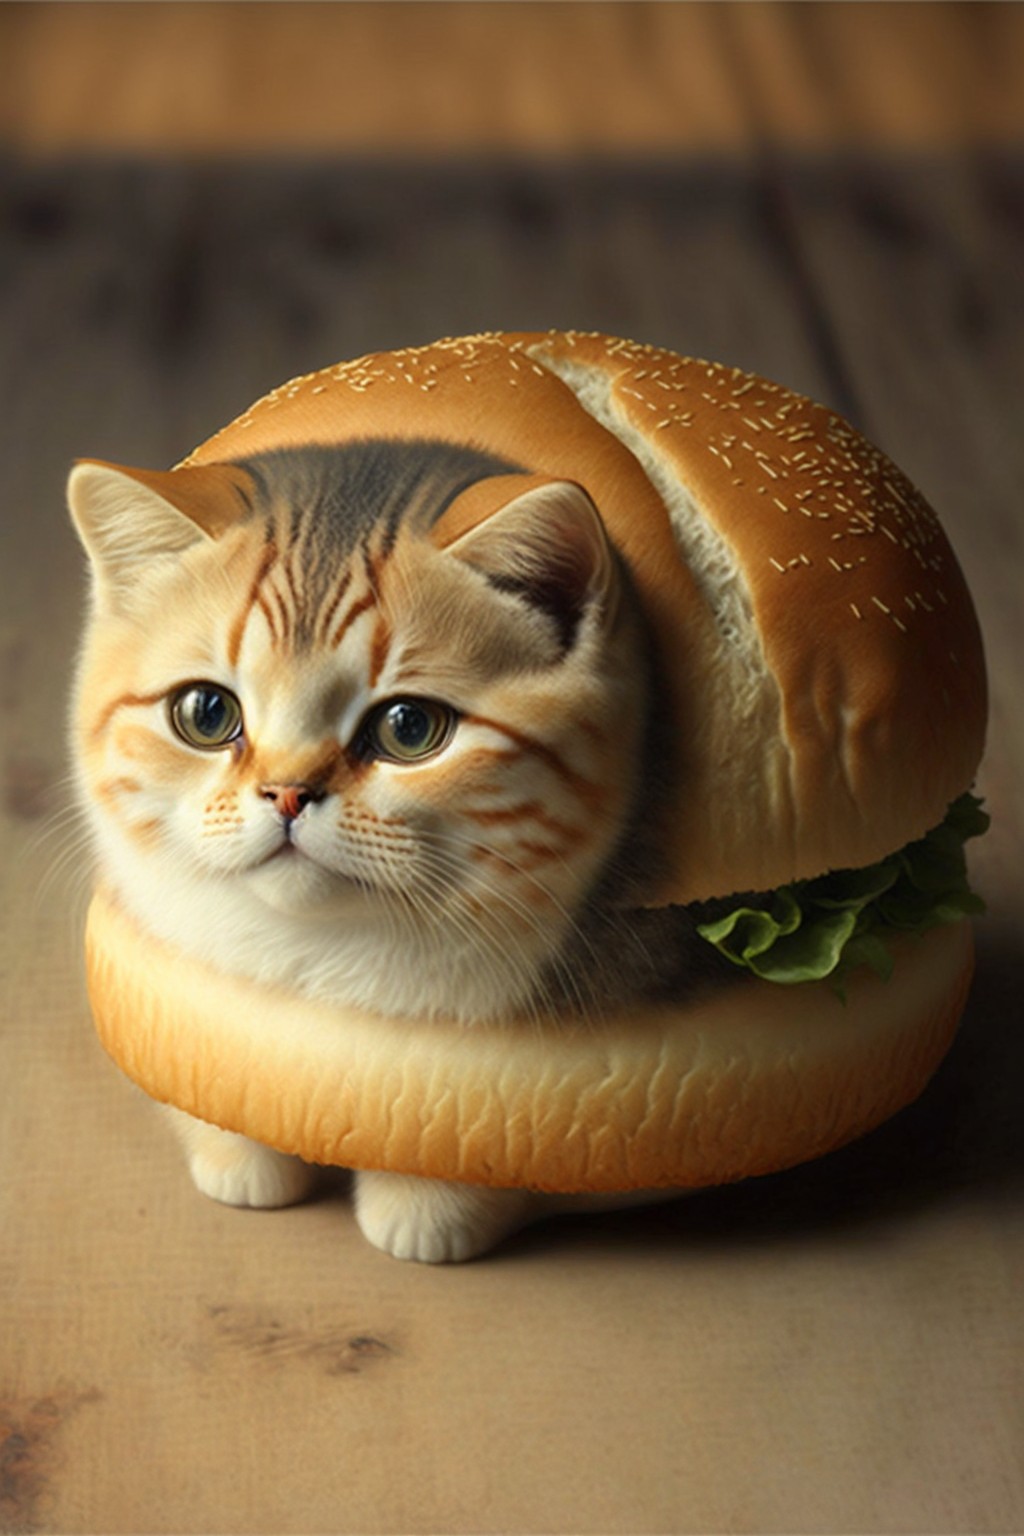 Cat Burger is here